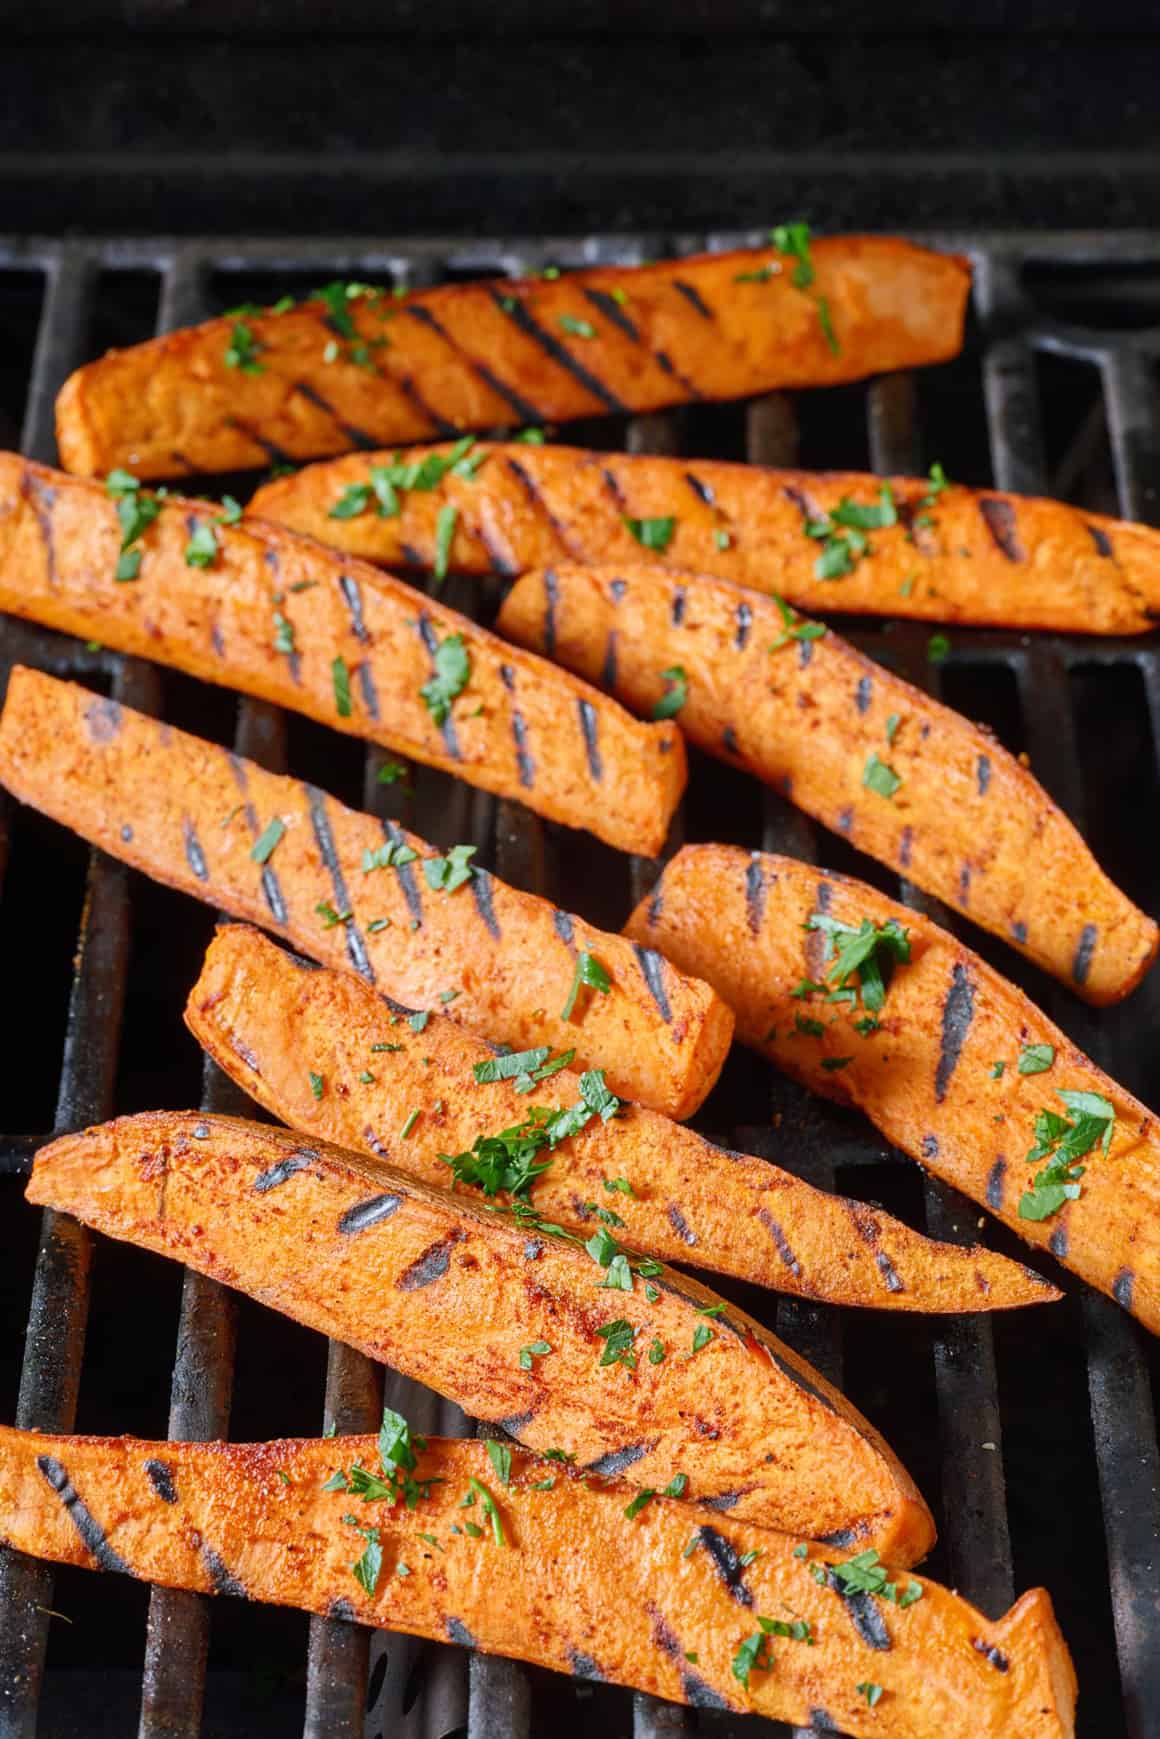 Grilled sweet potato wedges on an outdoor grill, garnished with fresh parsley.